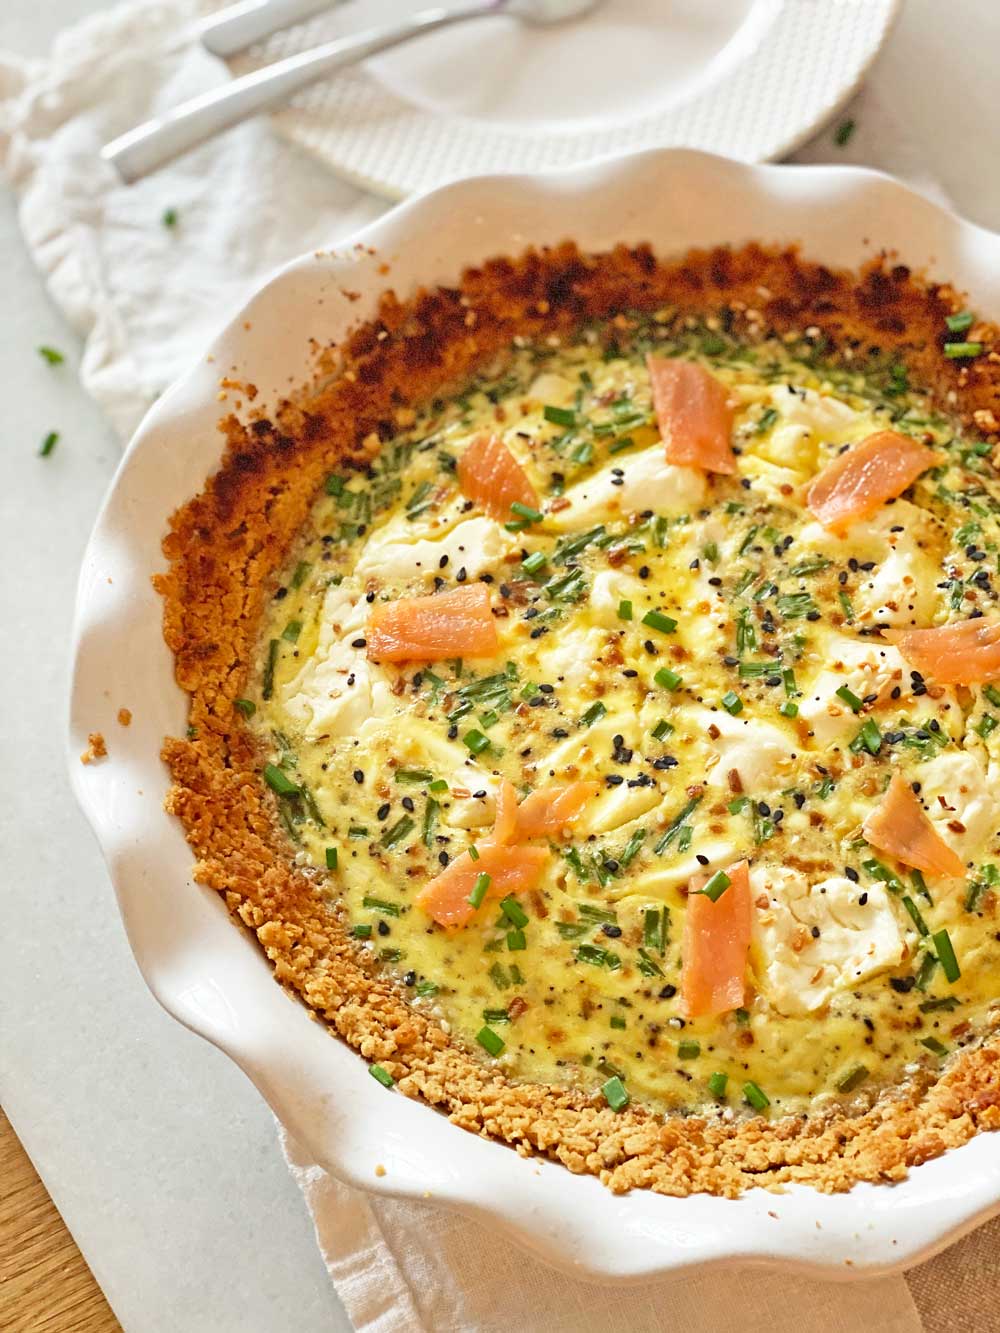 Bagel and Lox Quiche with Matzo Pie Crust Recipe. Perfect Passover recipe that is kosher for Passover. This tasted like a bagel with lox and cream cheese on an hot everything bagel. Lox, cream cheese, everything bagel seasoning, chives, eggs, and milk make up this awesome recipe. You can eat this for brunch, breakfast, dinner, or a snack. Happy Passover! www.ChopHappy.com #Passoverrecipe #matzo